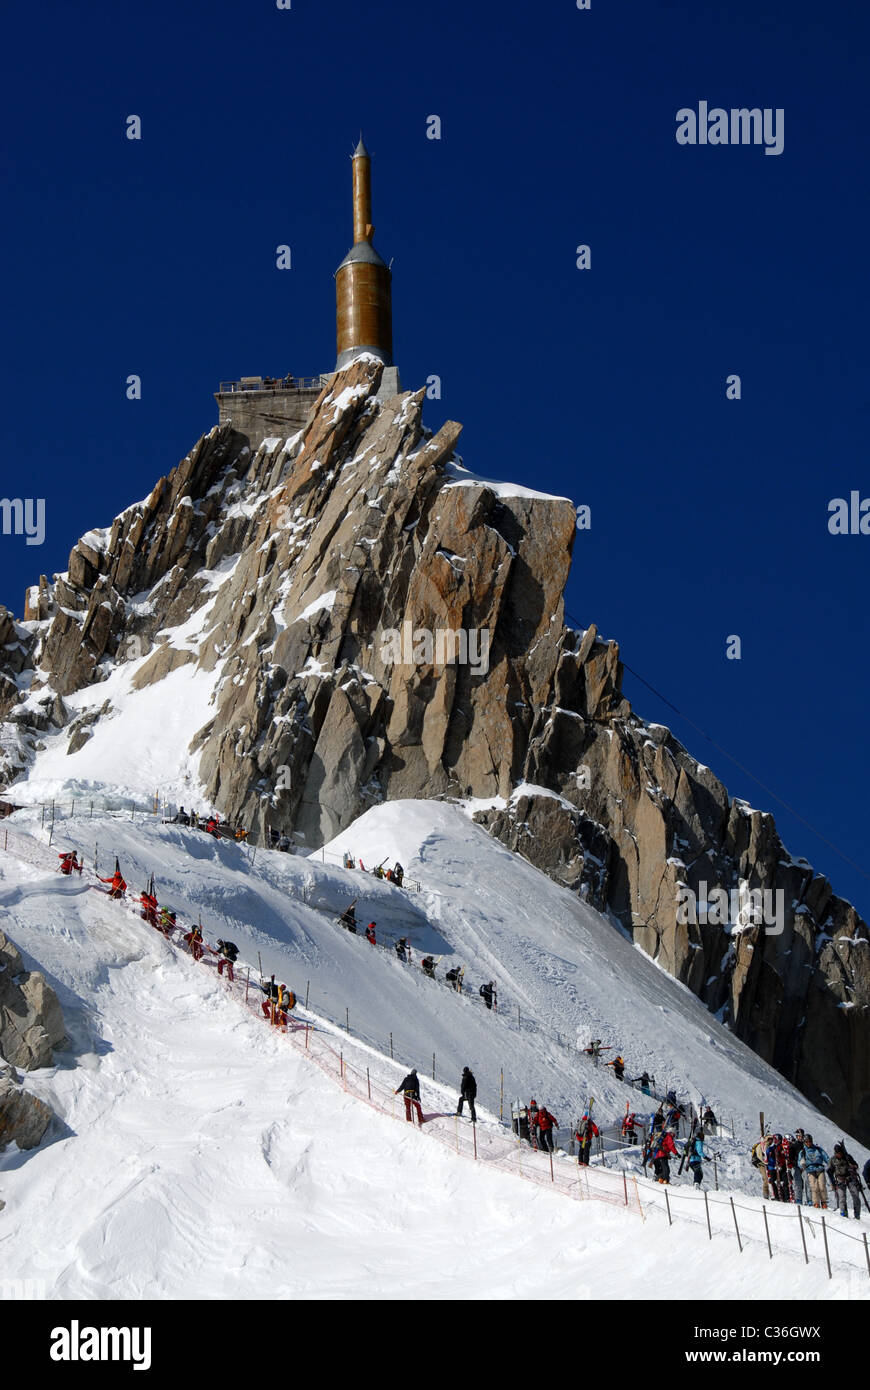 Skiers for tghe Vallée Blanche climb dowbn from Summit of Aiguille du Midi, France Stock Photo